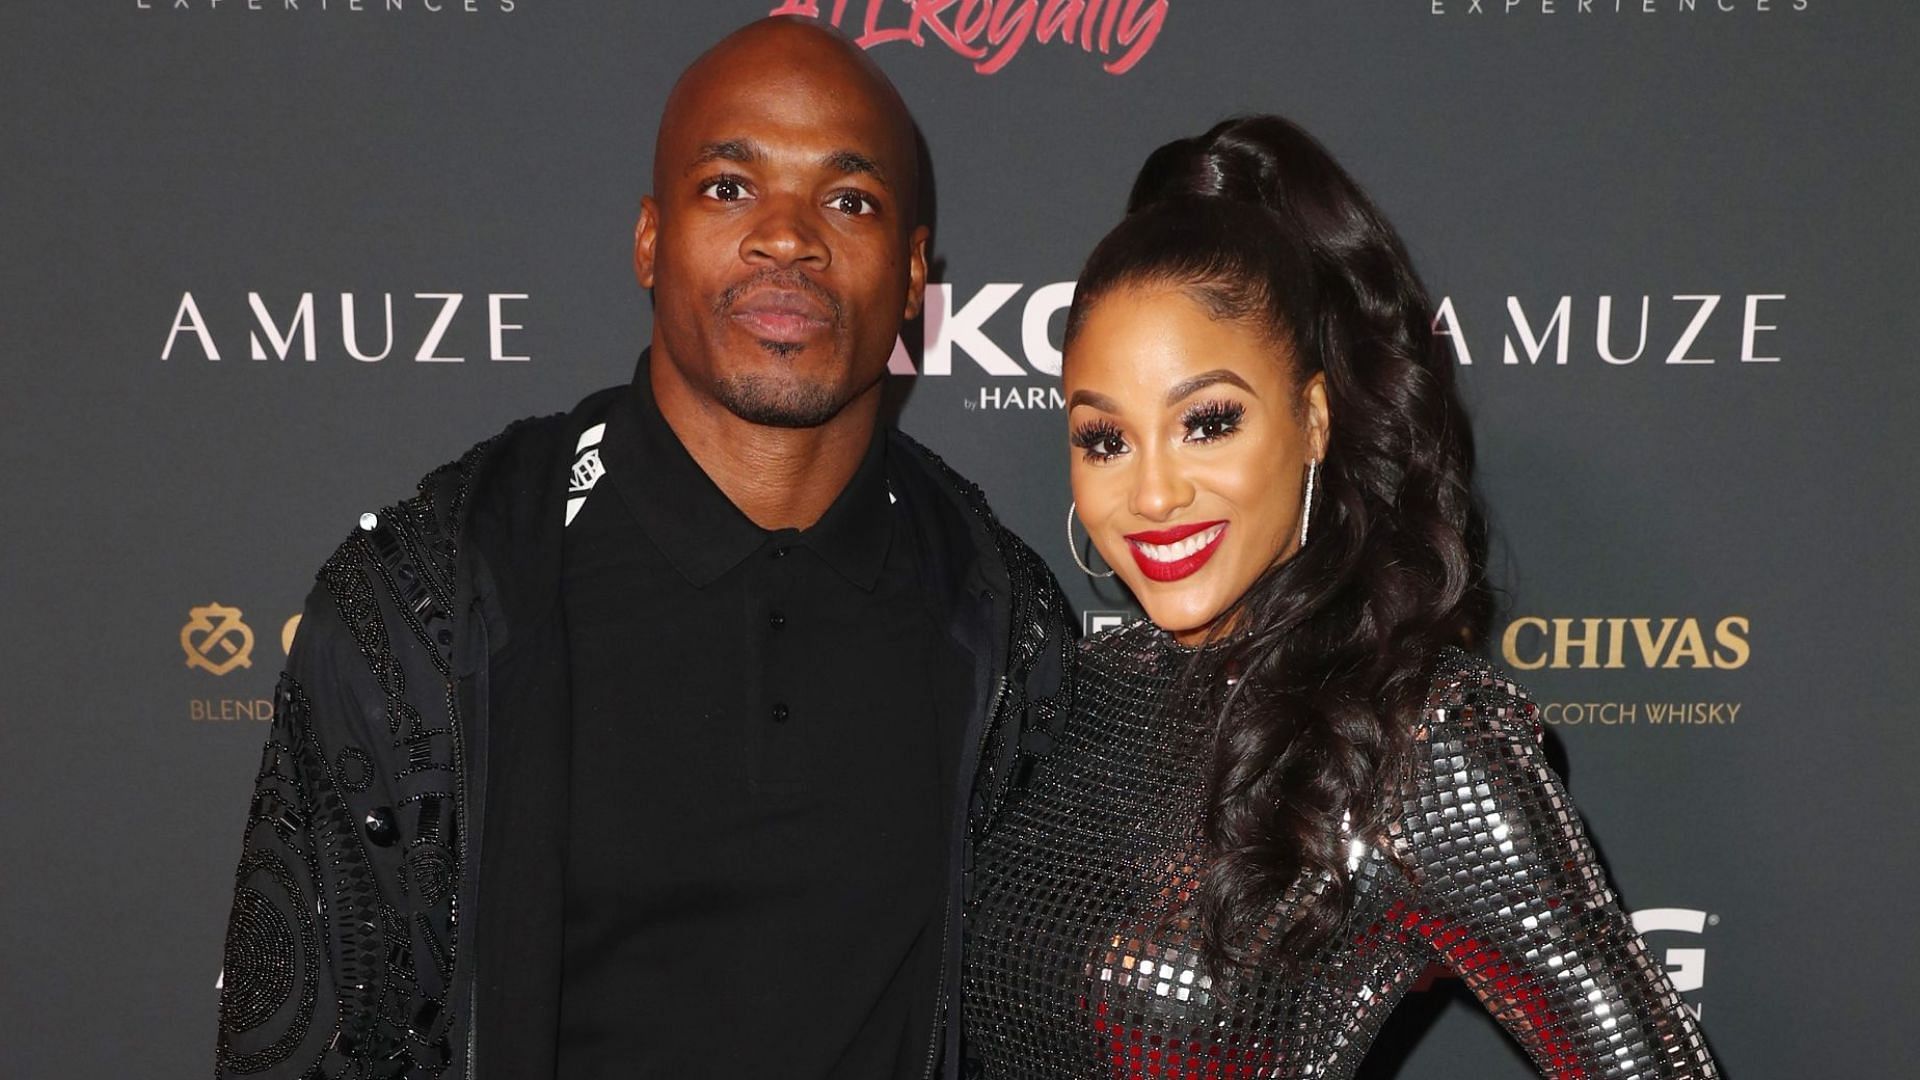 Adrian Peterson and Ashley Brown Peterson attend The Maxim Big Game Experience at The Fairmont on February 02, 2019 in Atlanta, Georgia. (Image credit: Joe Scarnici/Getty Images for Maxim)